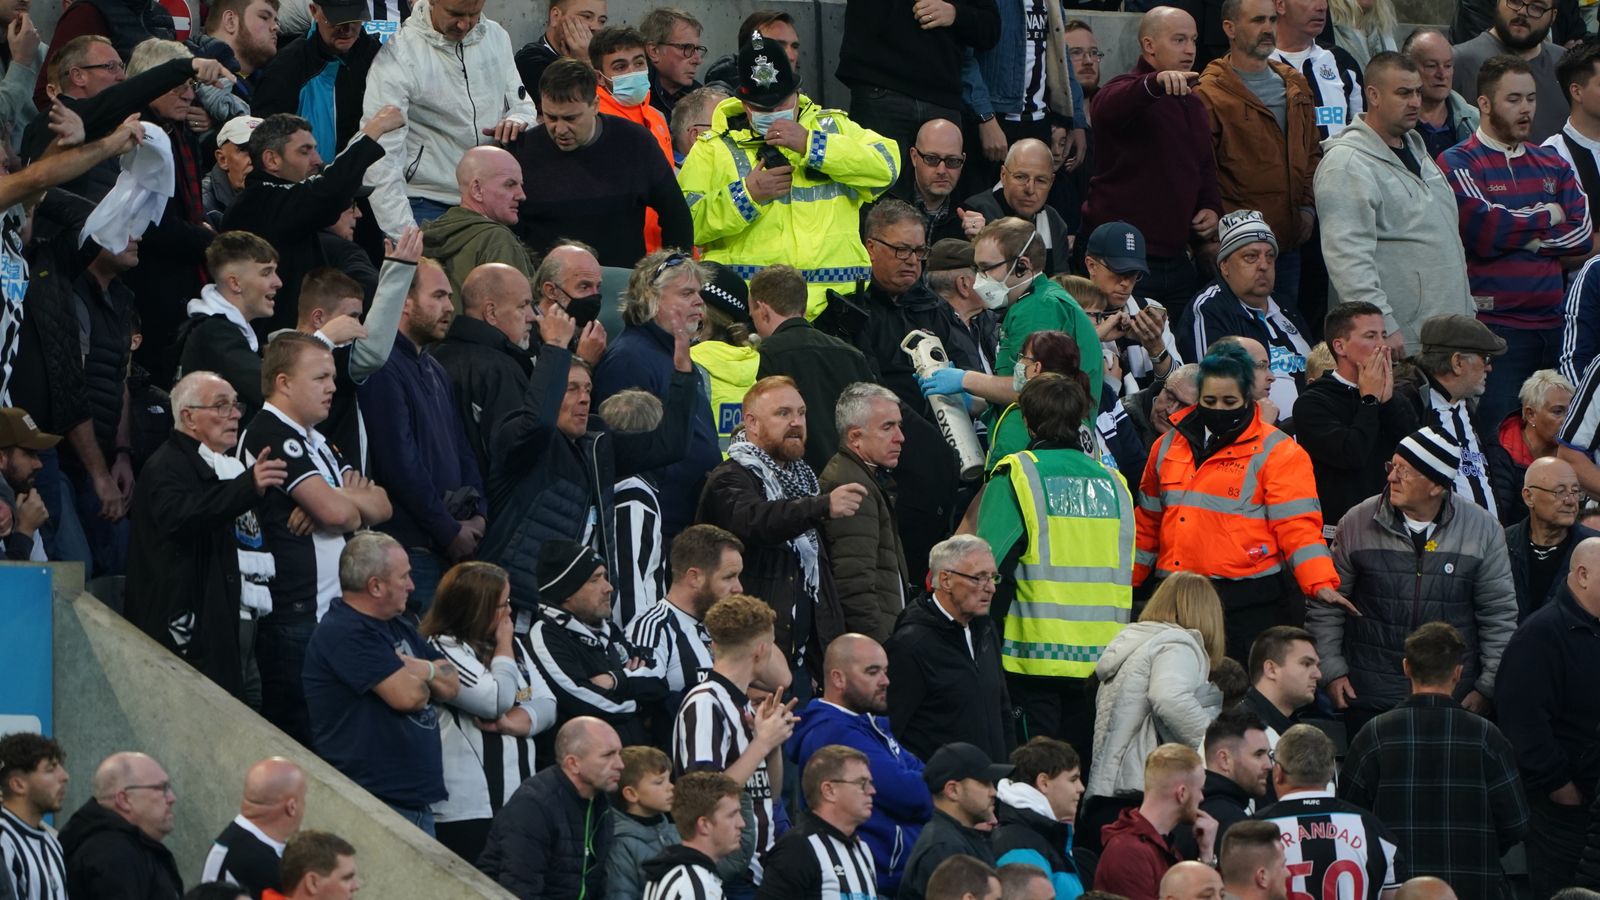 Newcastle fan who collapsed during Tottenham game discharged from hospital